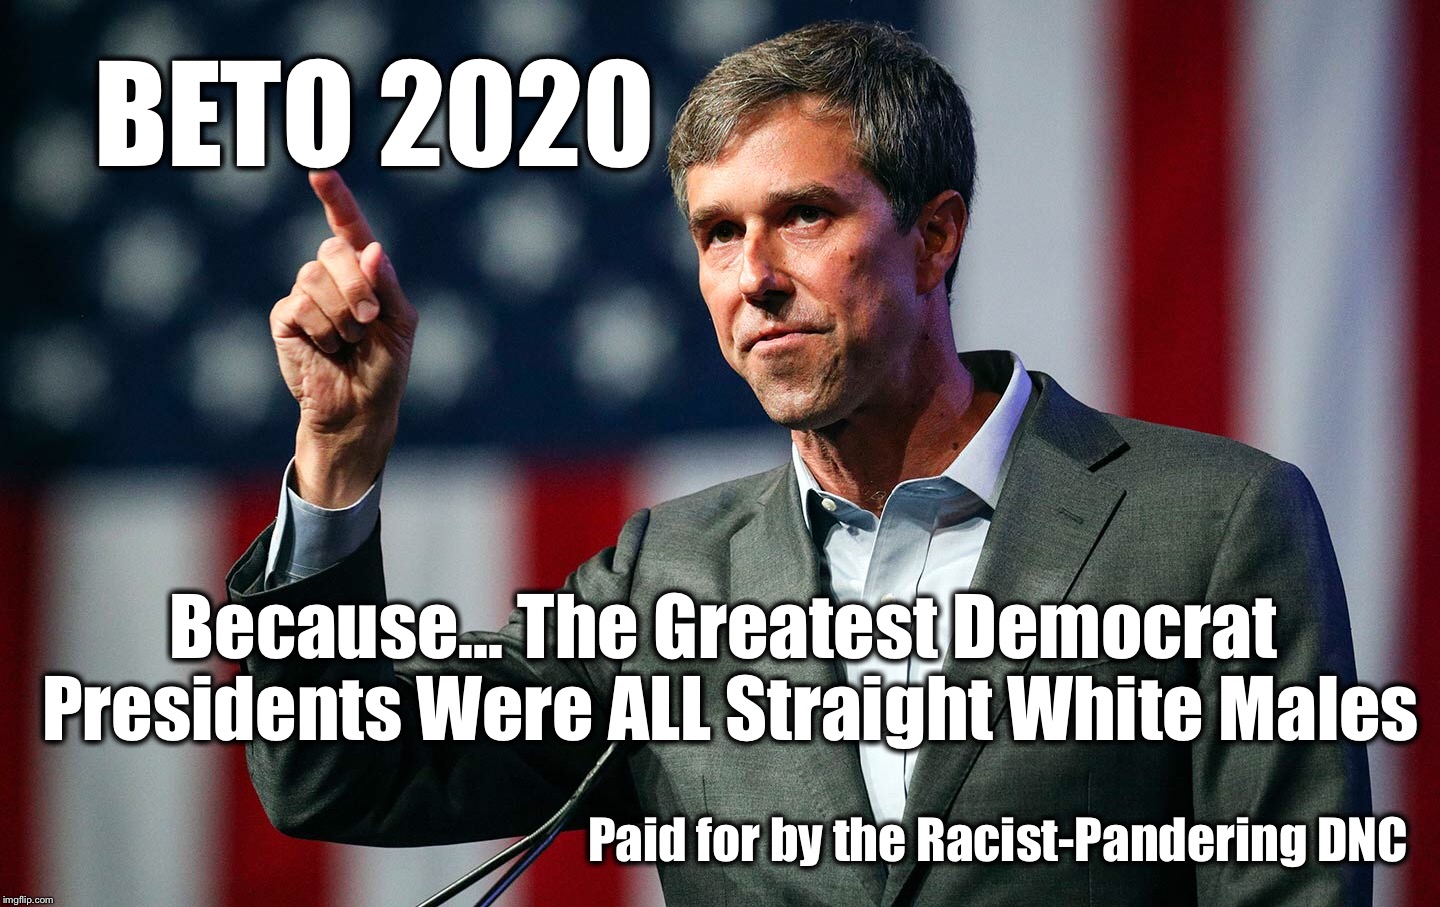 Beto 2020 | BETO 2020; Because...
The Greatest Democrat Presidents Were ALL Straight White Males; Paid for by the Racist-Pandering DNC | image tagged in beto,rascist,dnc,2020,president,straight white male | made w/ Imgflip meme maker